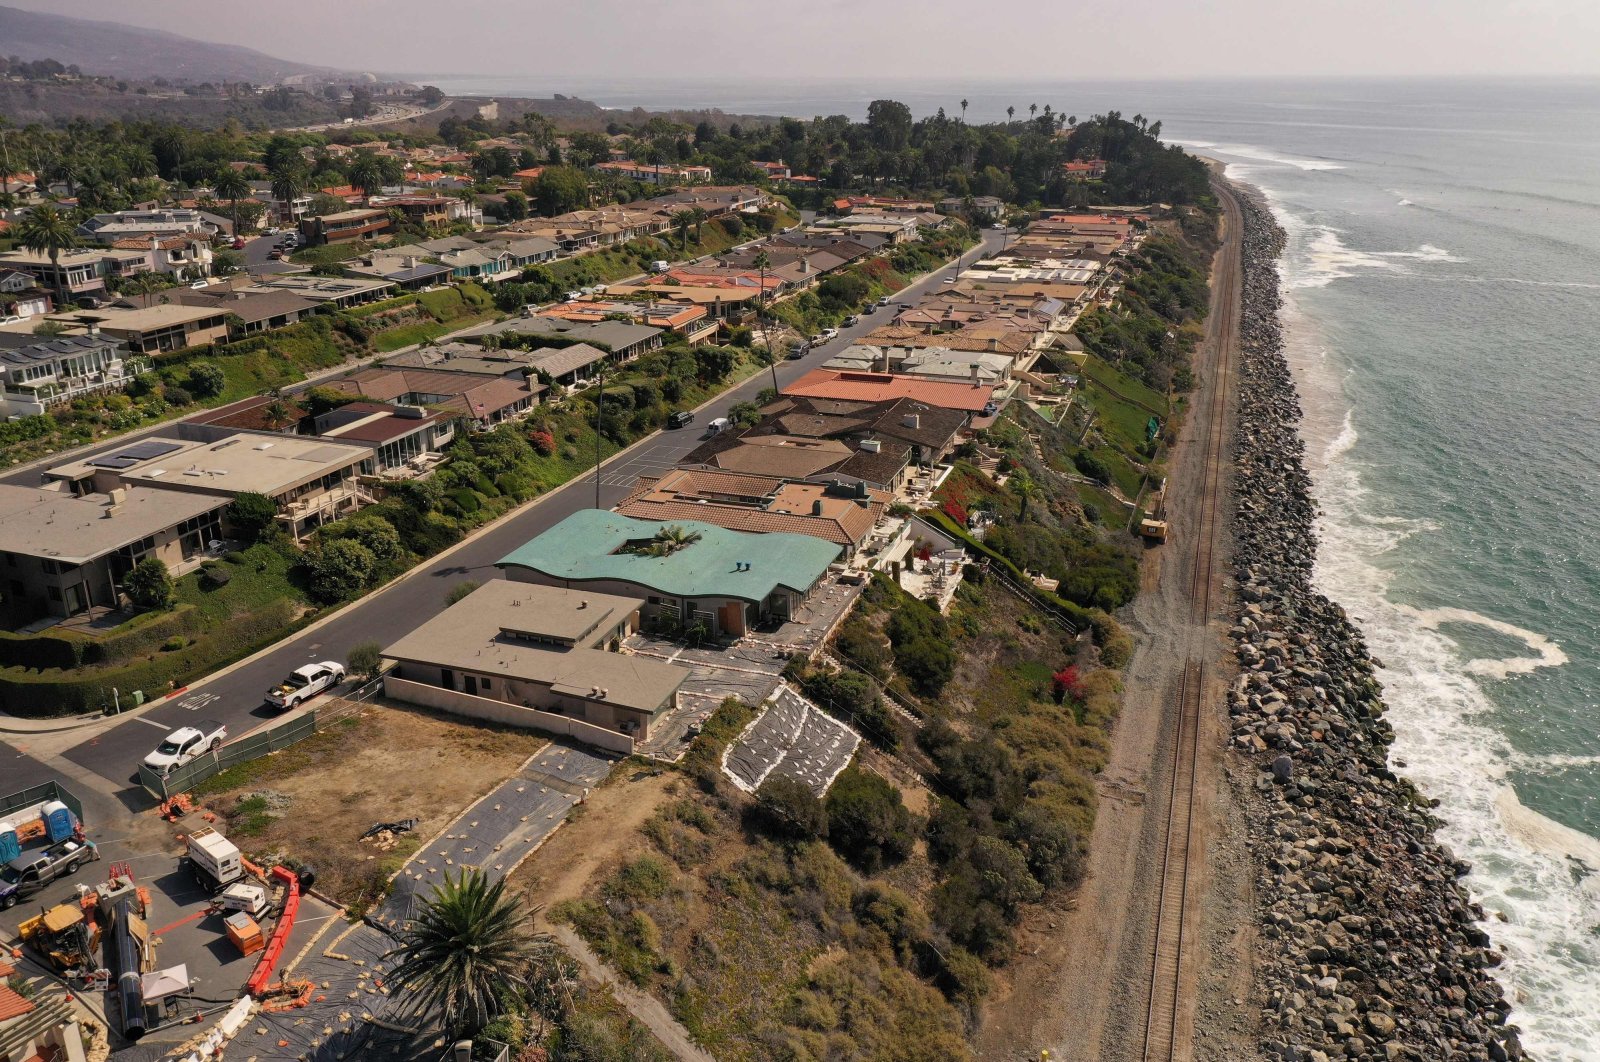 Train tracks follow along a coastline now devoid of all sand, near the exclusive Cyprus Shore residential community in San Clemente, California, U.S., Oct. 12, 2022. (AFP Photo)